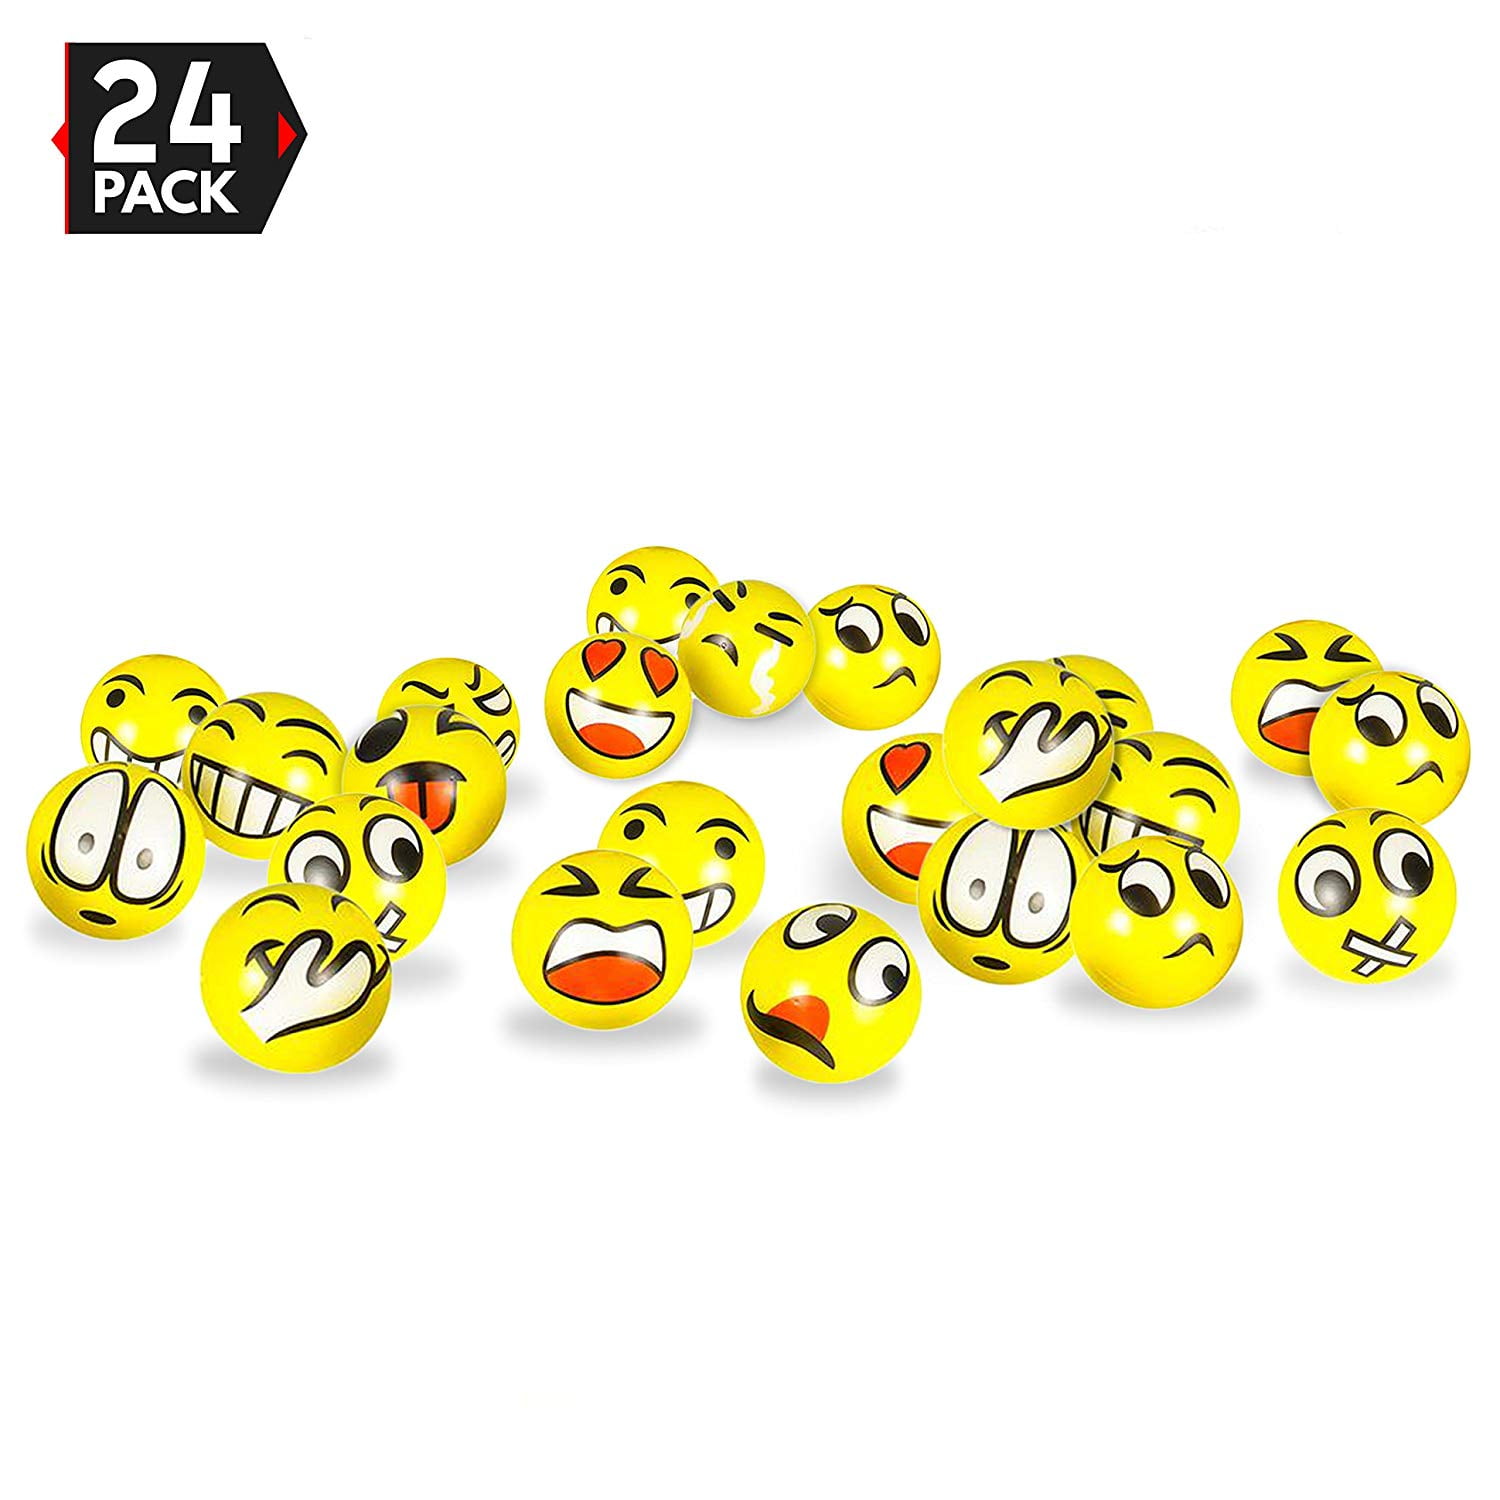 PACK OF 24 EMOJI CUPCAKE CAKE TOPPER BIRTHDAY PARTY SUPPLIES DECORATION FAVOR 